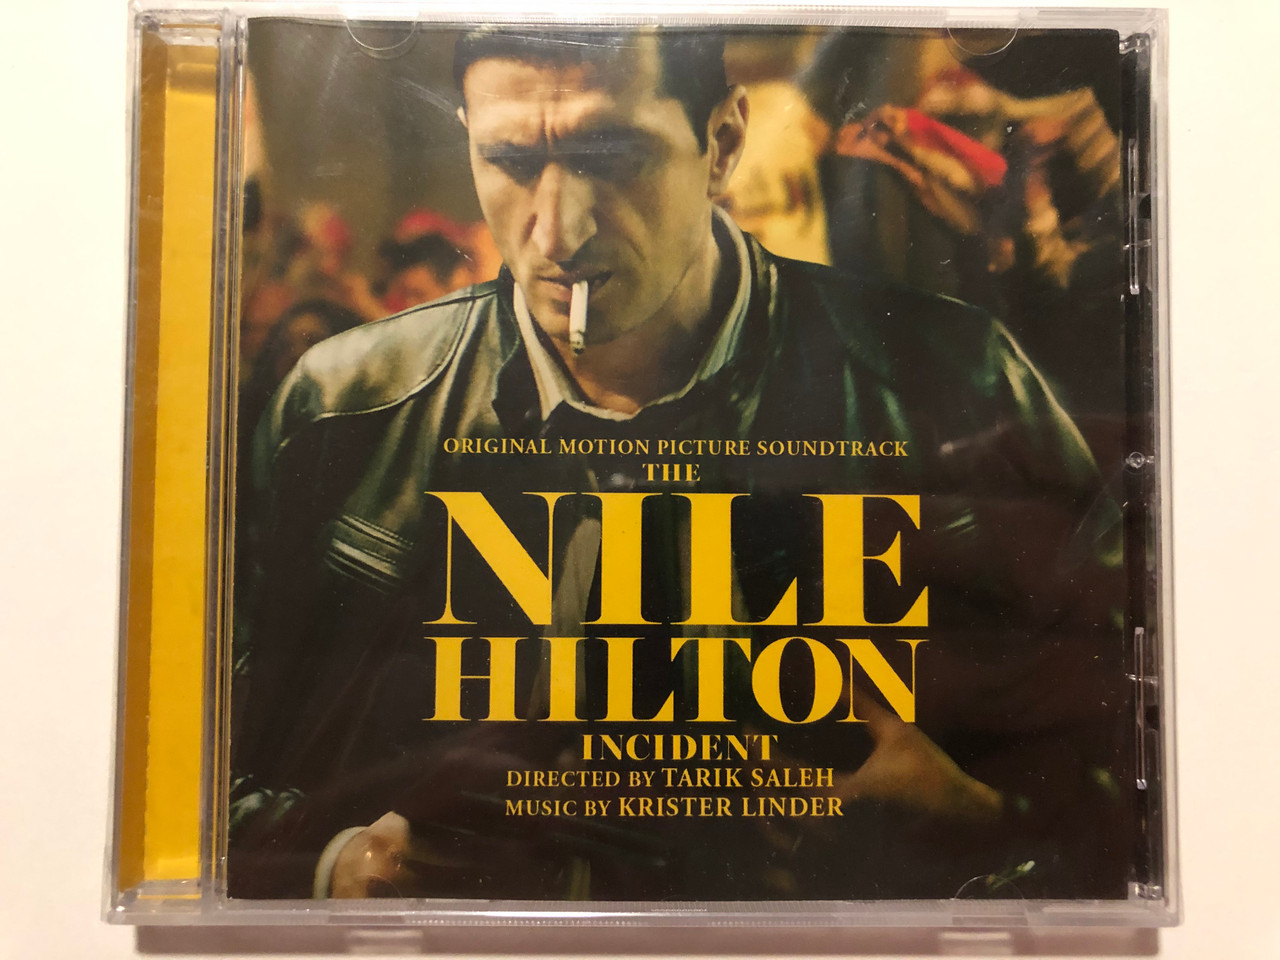 https://cdn10.bigcommerce.com/s-62bdpkt7pb/products/29800/images/177367/The_Nile_Hilton_Incident_Motion_Picture_Soundtrack_Directed_by_Tarik_Saleh_Music_by_Krister_Linder_Ghostfriend_Audio_CD_2017_399_959-2_1__67153.1620128695.1280.1280.JPG?c=2&_ga=2.83080982.1691390246.1620743568-1701260778.1620743568